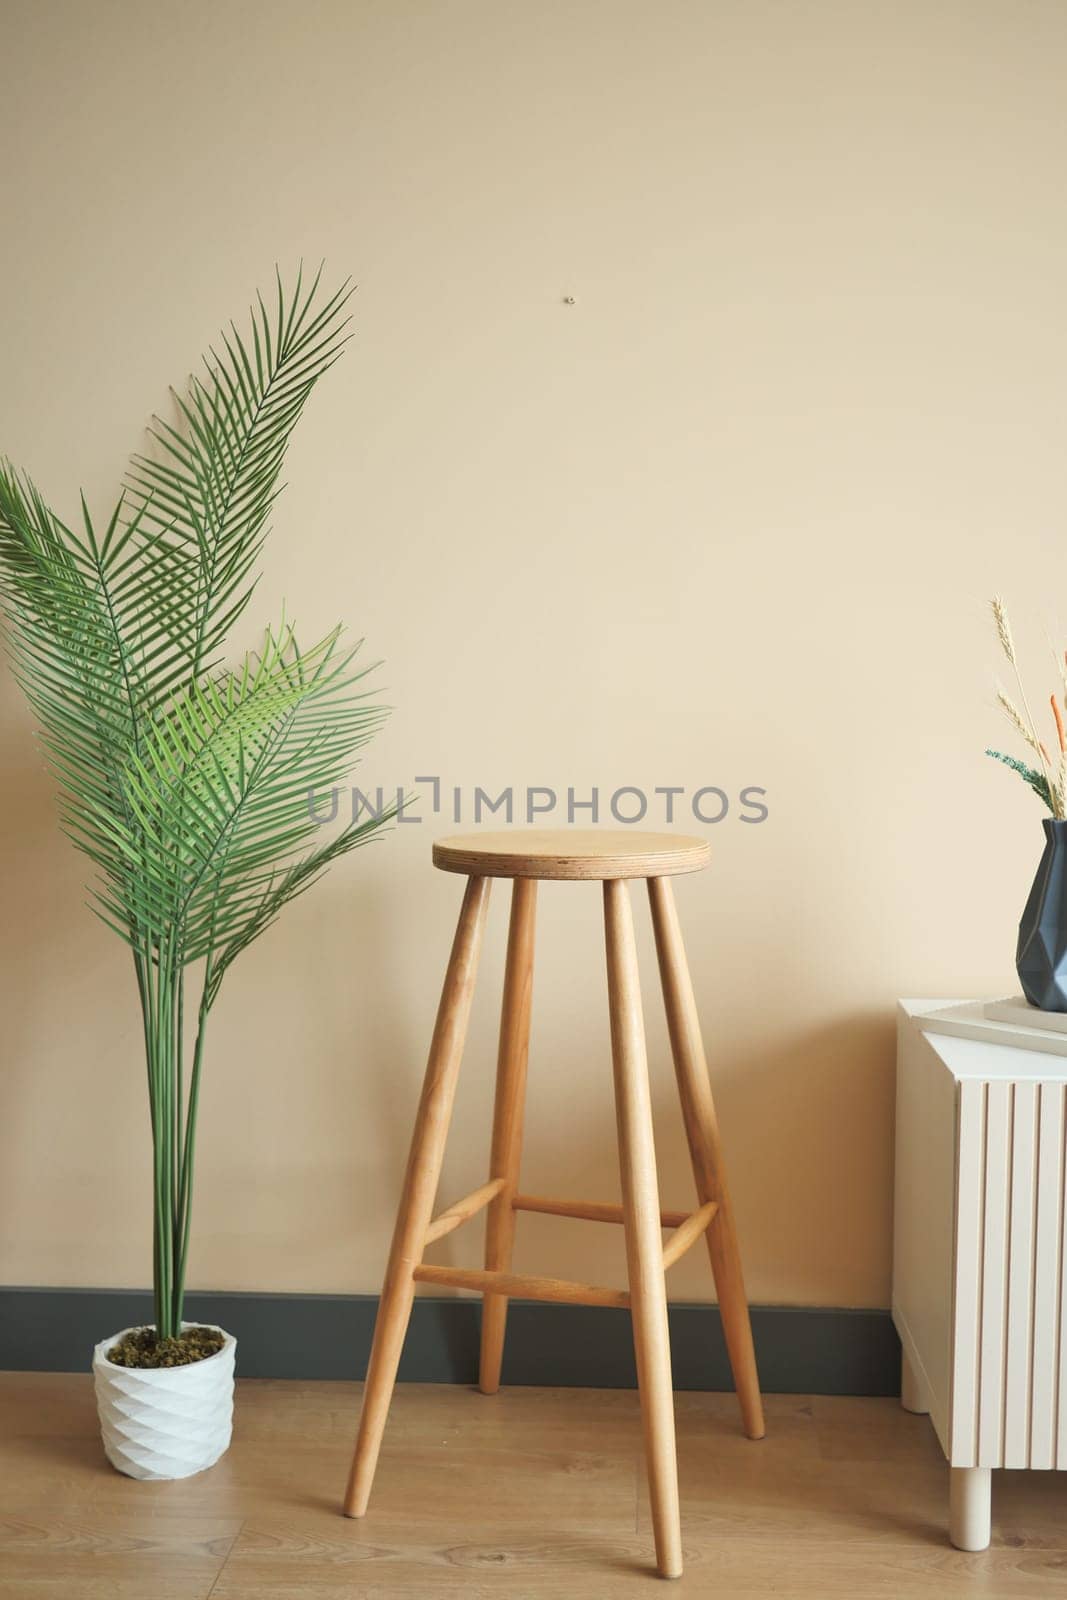 Wooden stool and potted plant complement rooms interior design by towfiq007